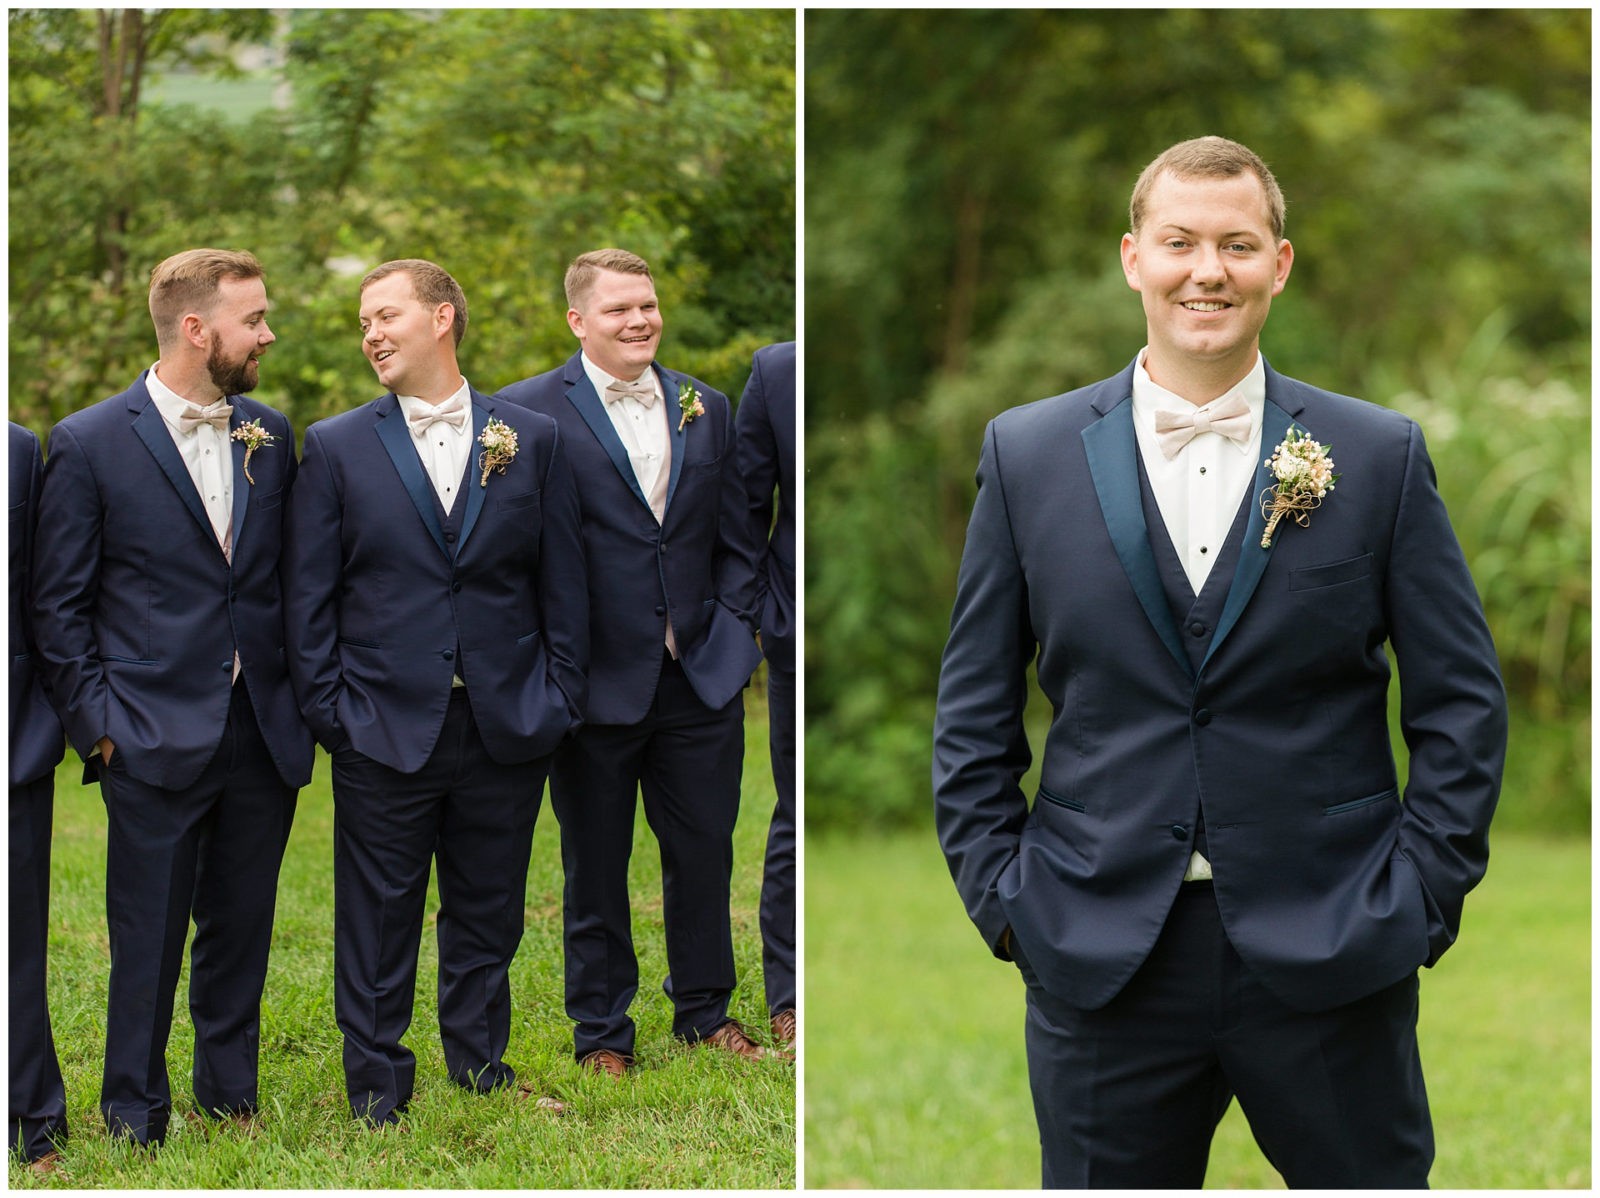 Wedding Groom and Groomsmen Photos at the Barn at McCall Springs in Lawrenceburg, Kentucky.